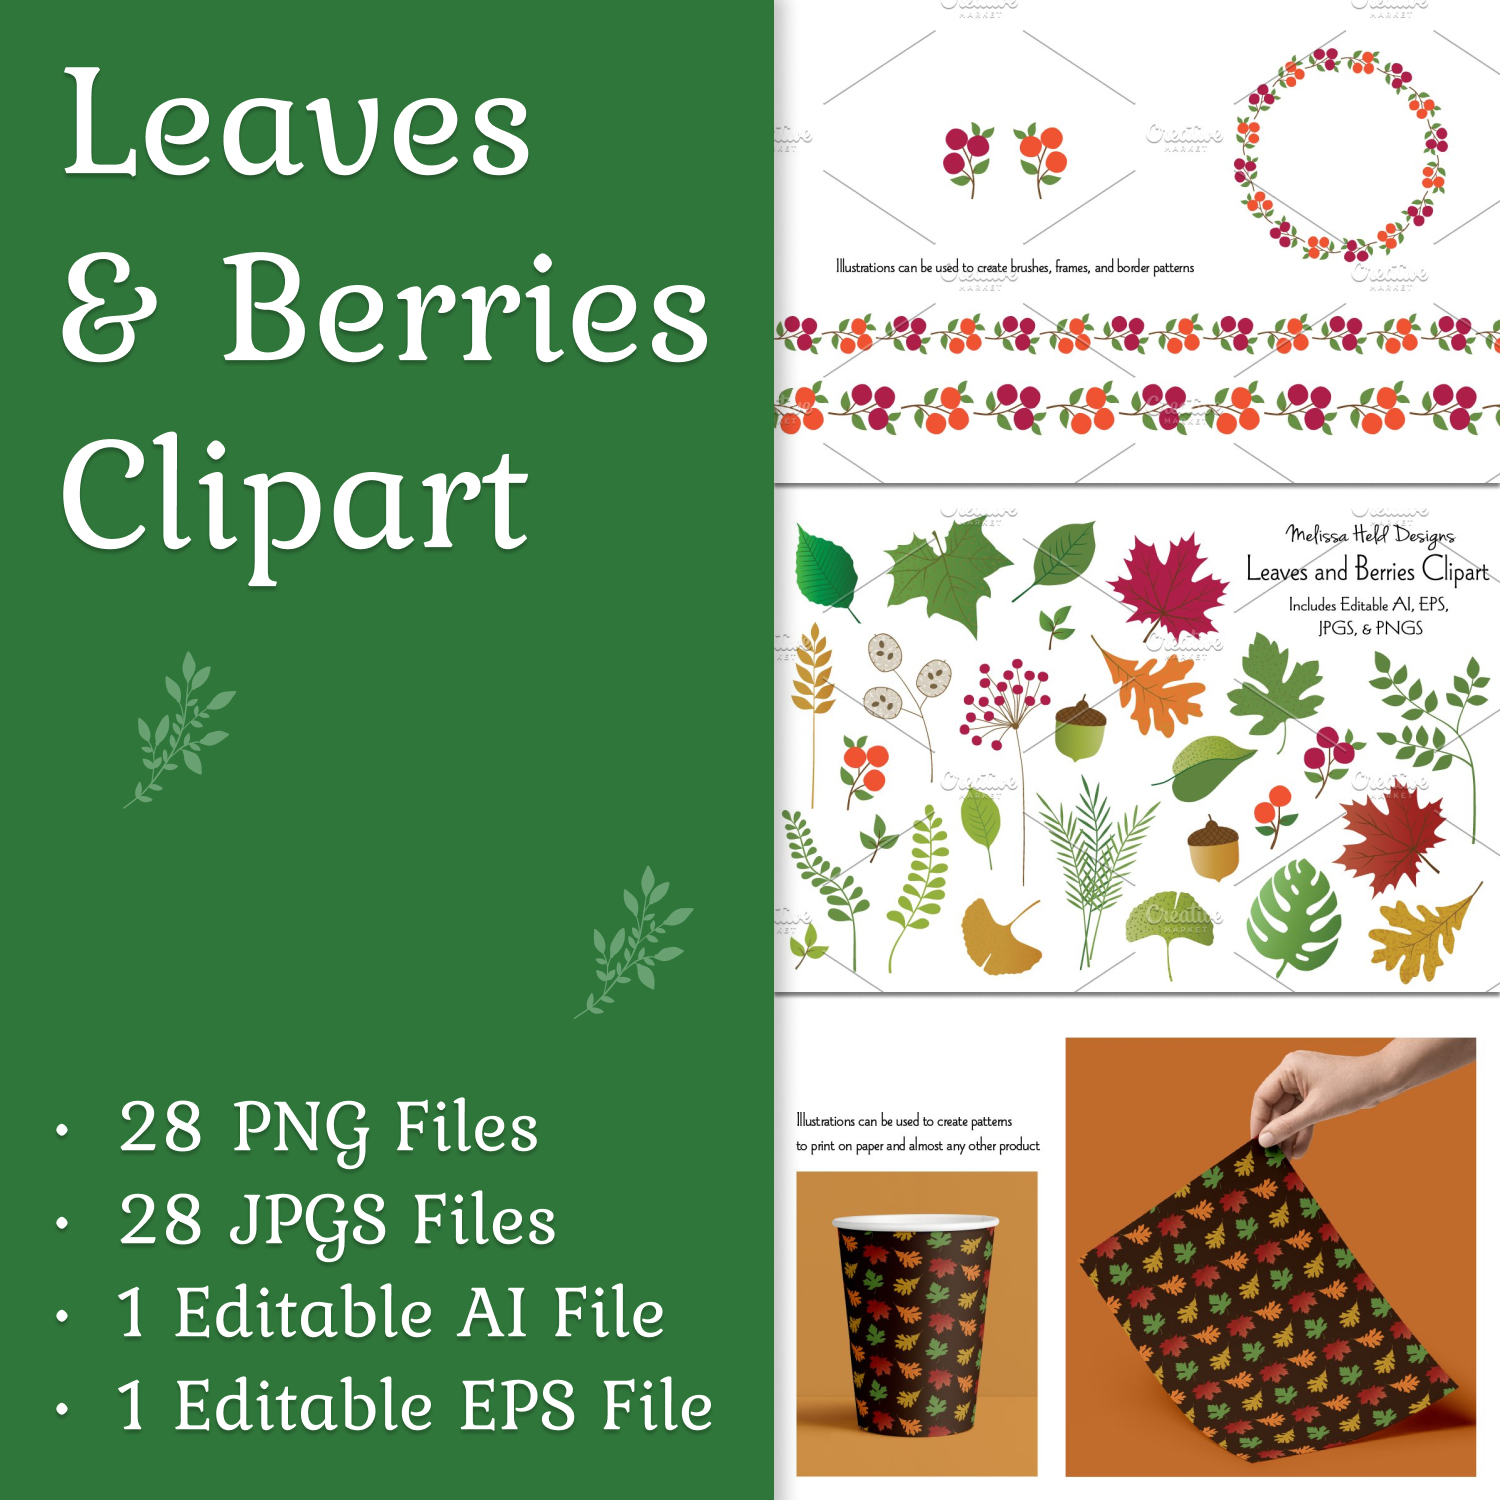 Preview leaves berries clipart.